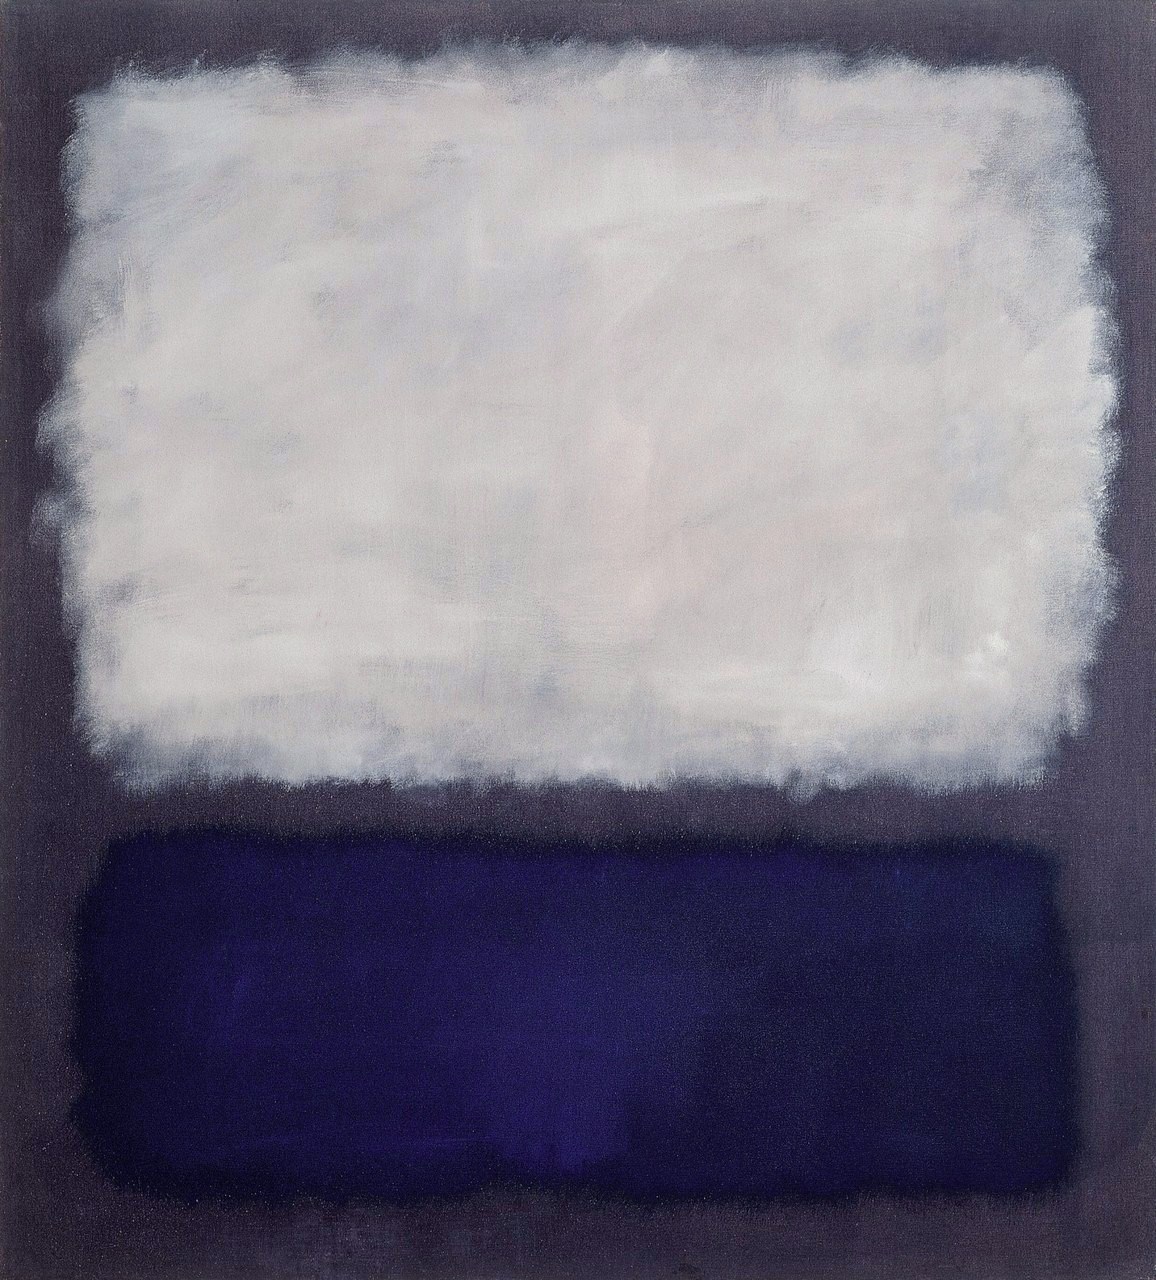 free-parking:
“ Mark Rothko, Blue and Grey, 1962, oil on canvas
“I’m not an abstractionist… I’m not interested in relationships of color or forms… I’m interested only in expressing basic human emotions—tragedy, ecstasy, doom and so on… The people who...